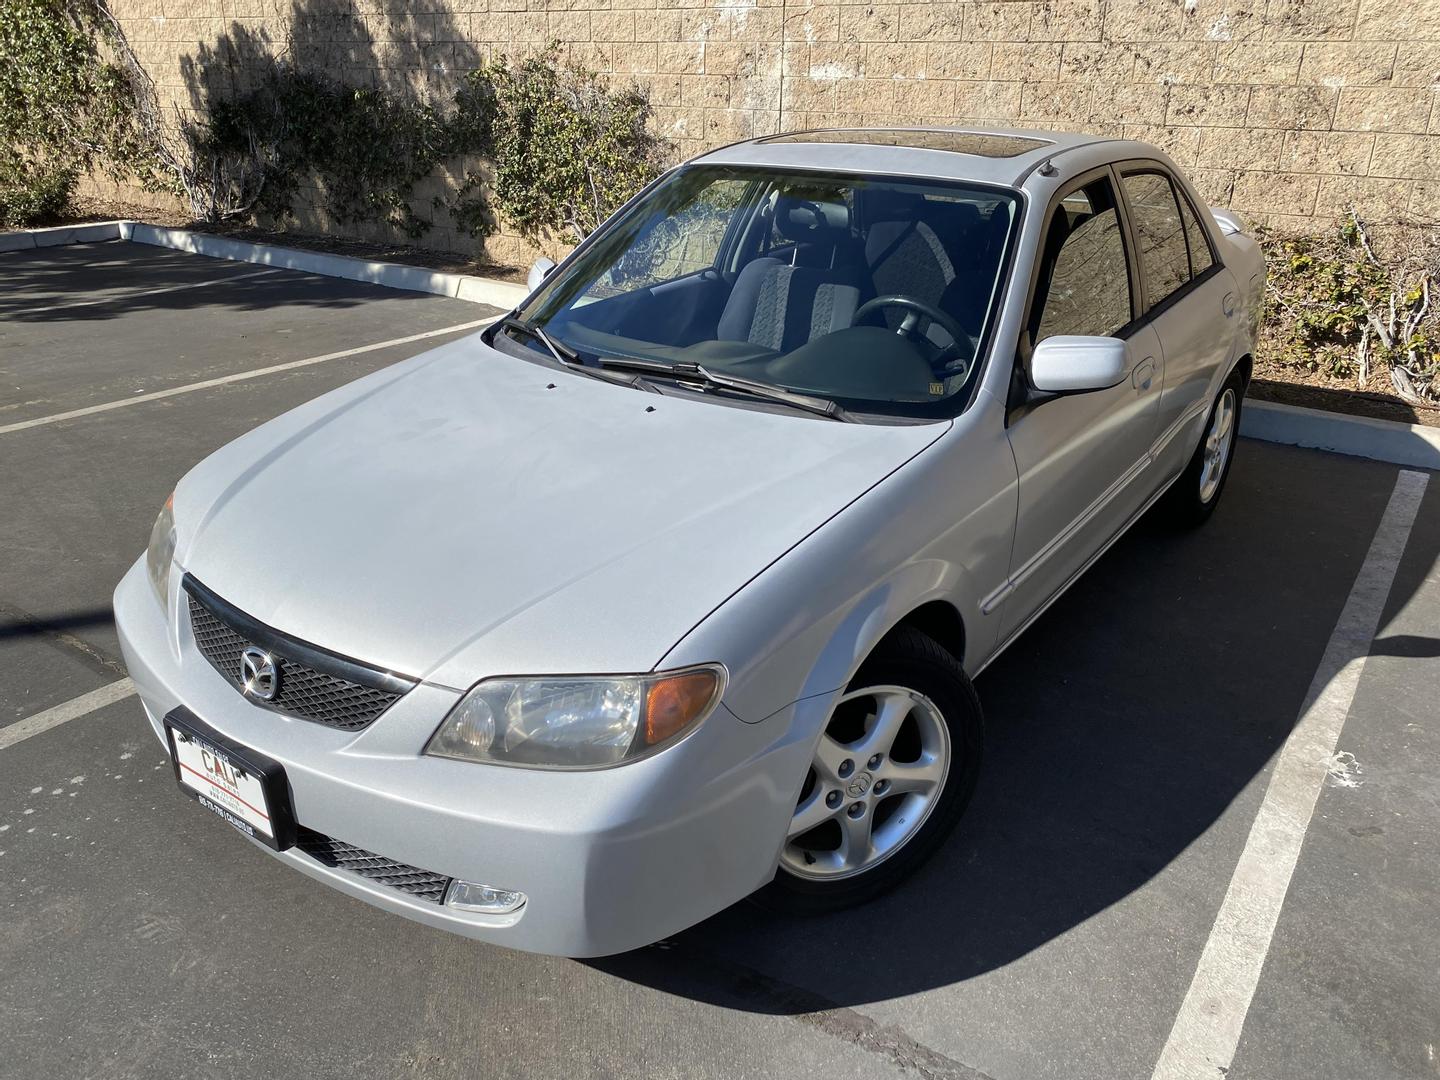 Used Mazda Protege's nationwide for sale - MotorCloud